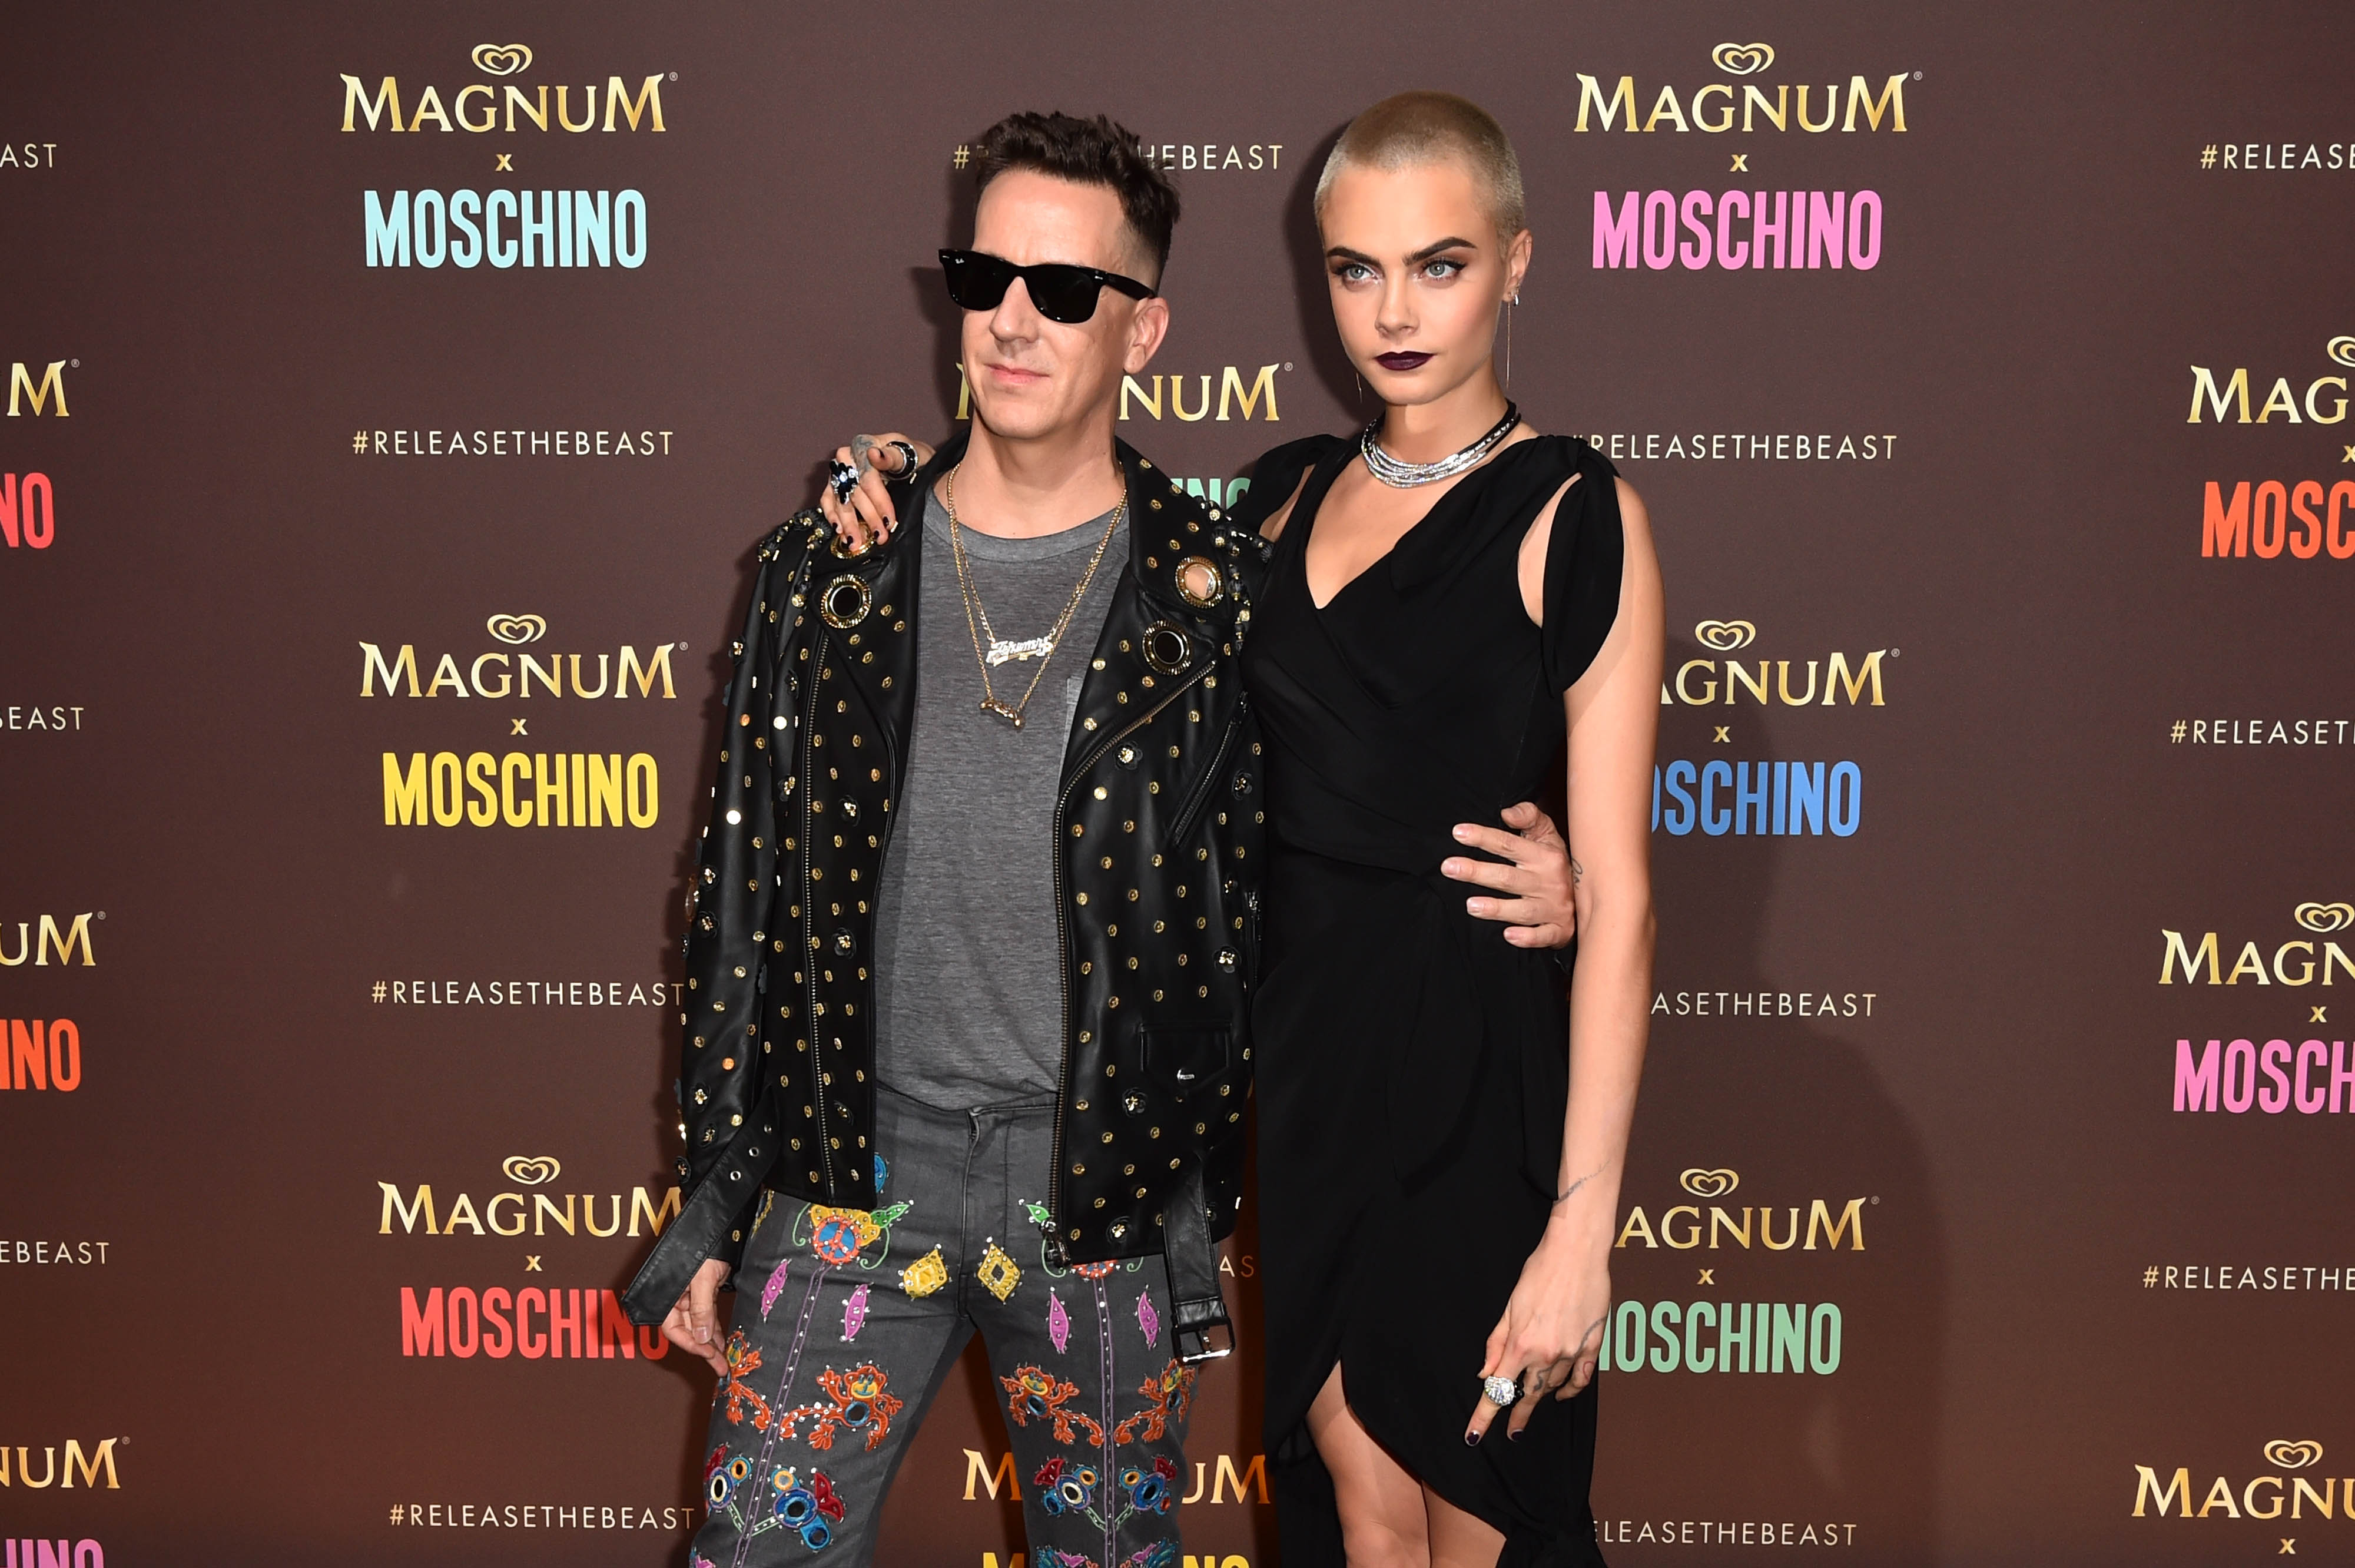 Cara Delevingne, and Jeremy Scott, Moschino Creative Director, arrive at the Magnum x Moschino ÔRelease the BeastÕ party in Cannes, France. PRESS ASSOCIATION Photo. Picture date: Thursday May 18, 2017. Photo credit should read: Matt Crossick/PA Wire